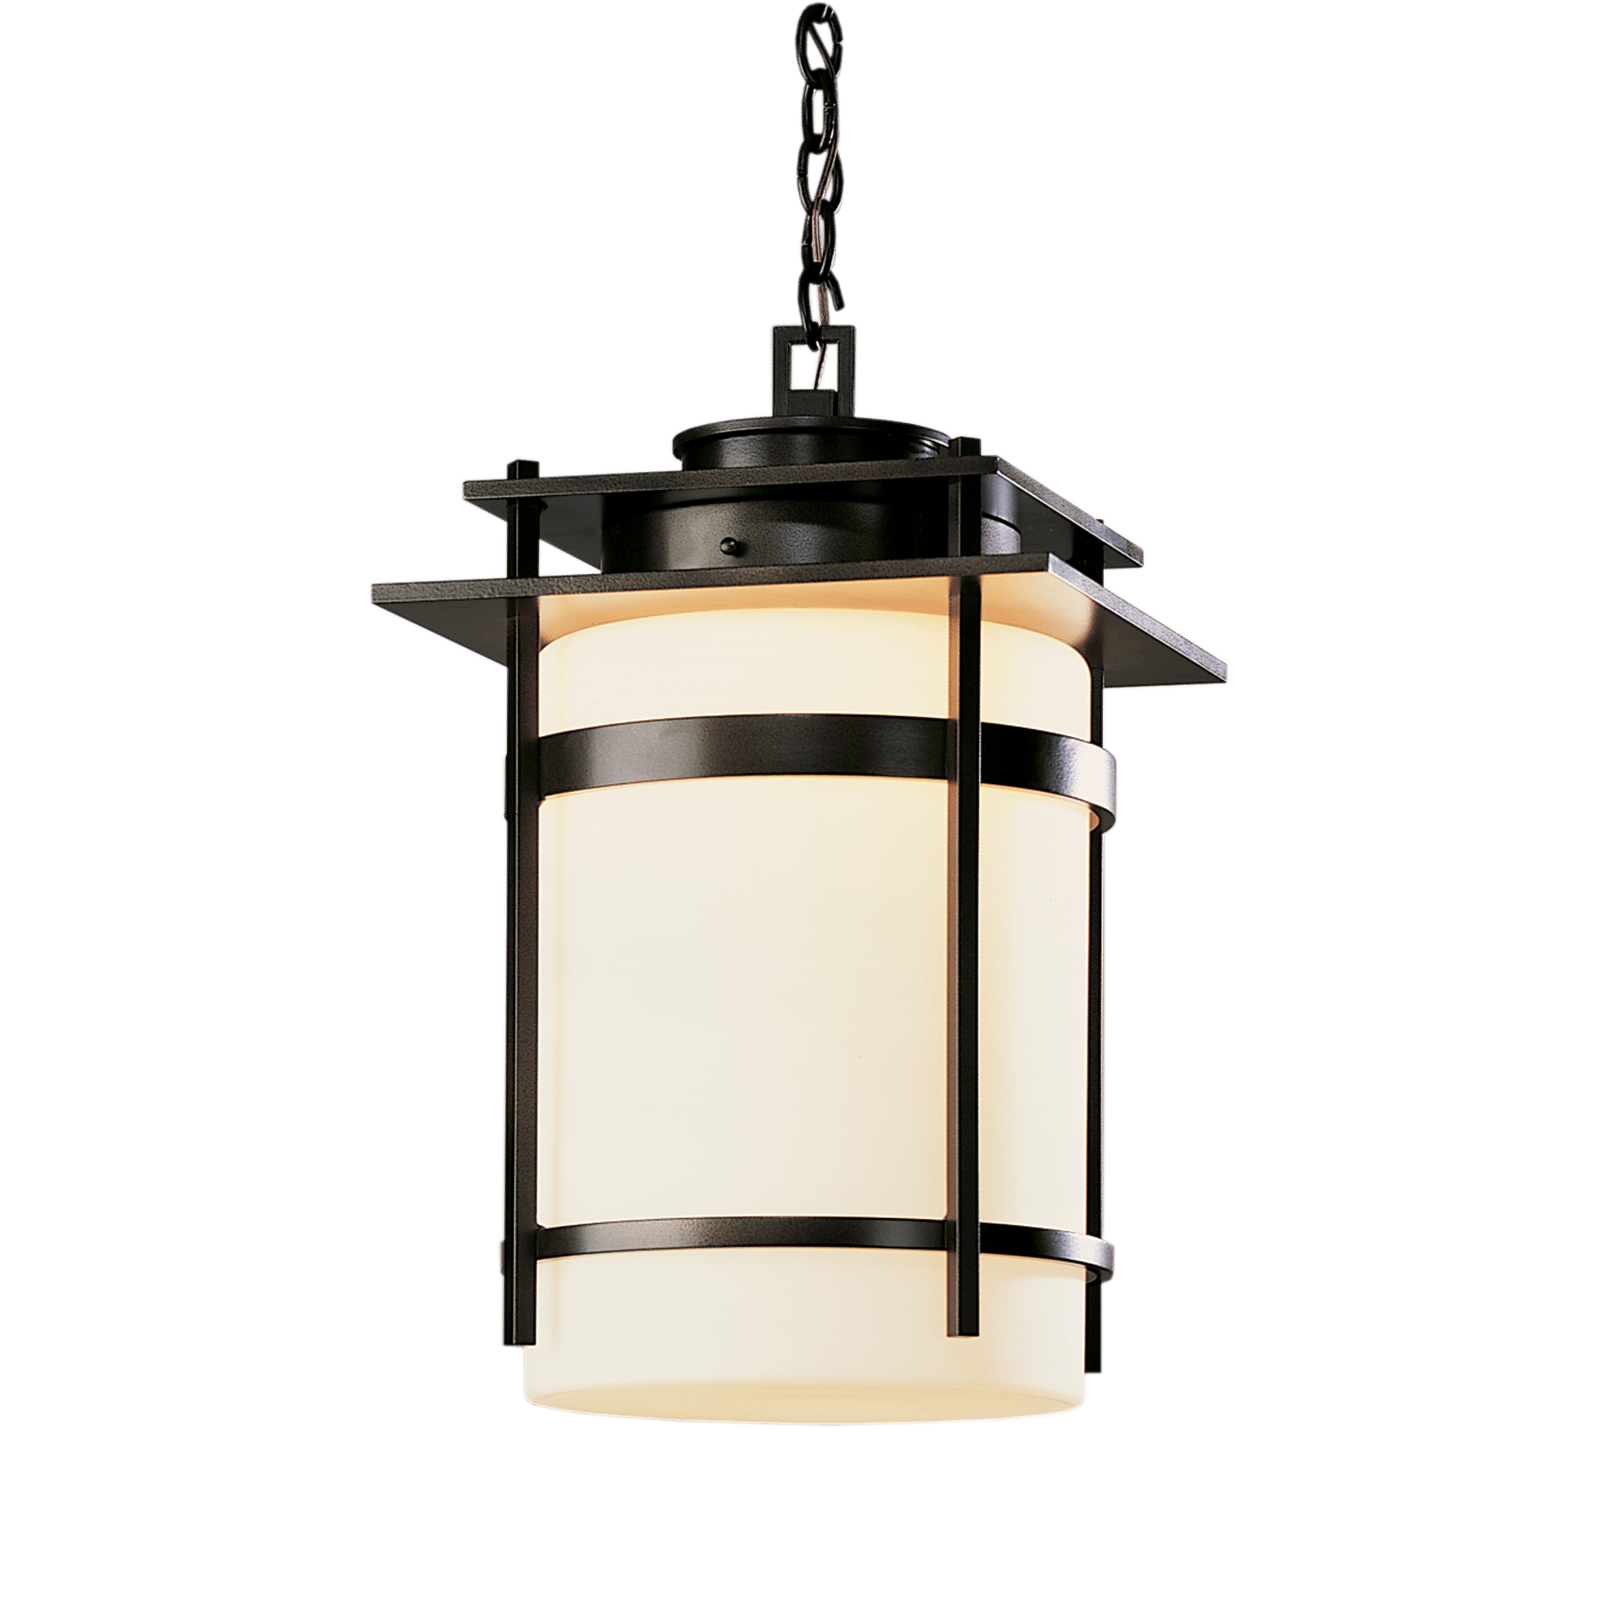 Hubbardton Forge Banded Large Outdoor Fixture Outdoor l Wall Hubbardton Forge Coastal Black Opal Glass (GG) 